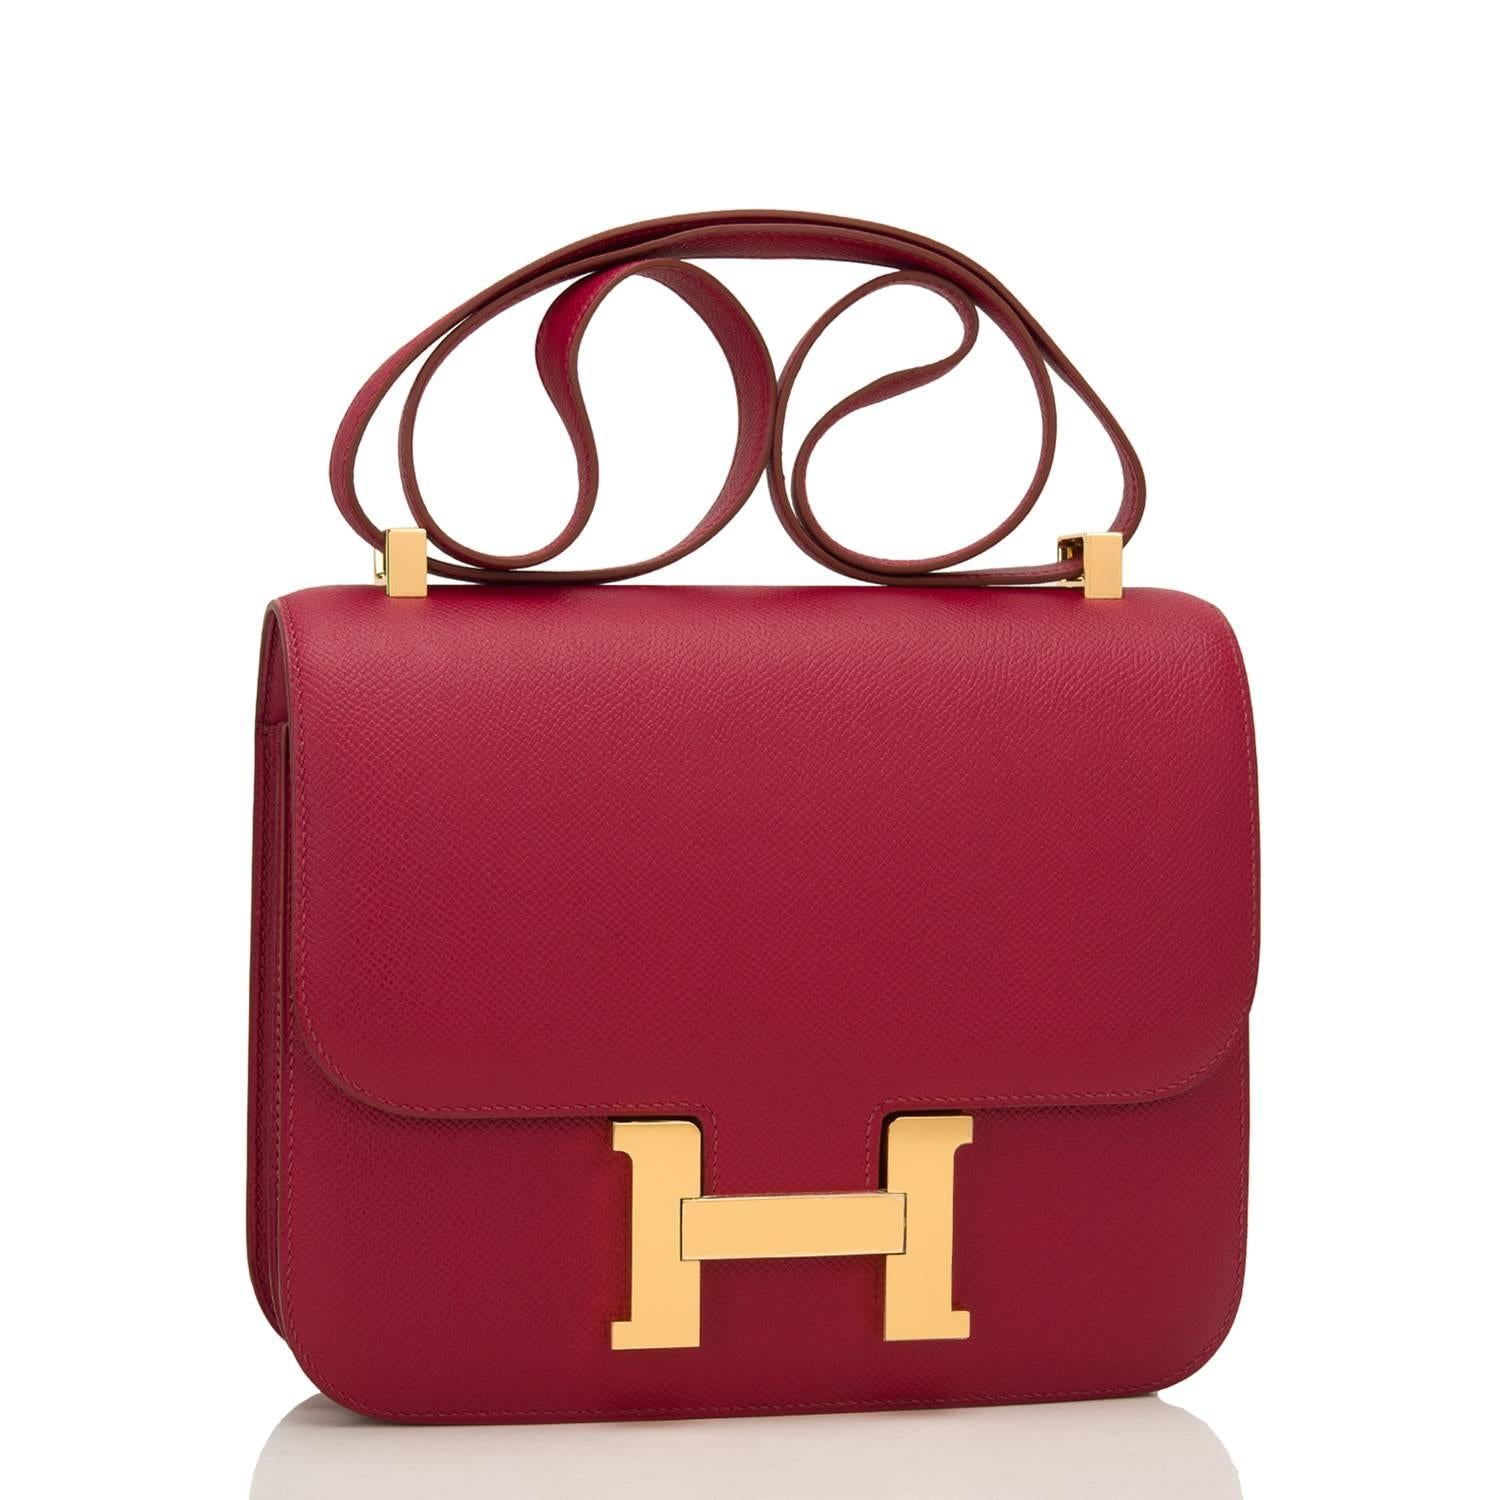 Hermes Rubis Constance 24cm of epsom leather with gold hardware.

This Constance has tonal stitching, a metal "H" snap lock closure, and an adjustable shoulder strap.

The interior is lined with rubis lambskin leather and has a zip pocket